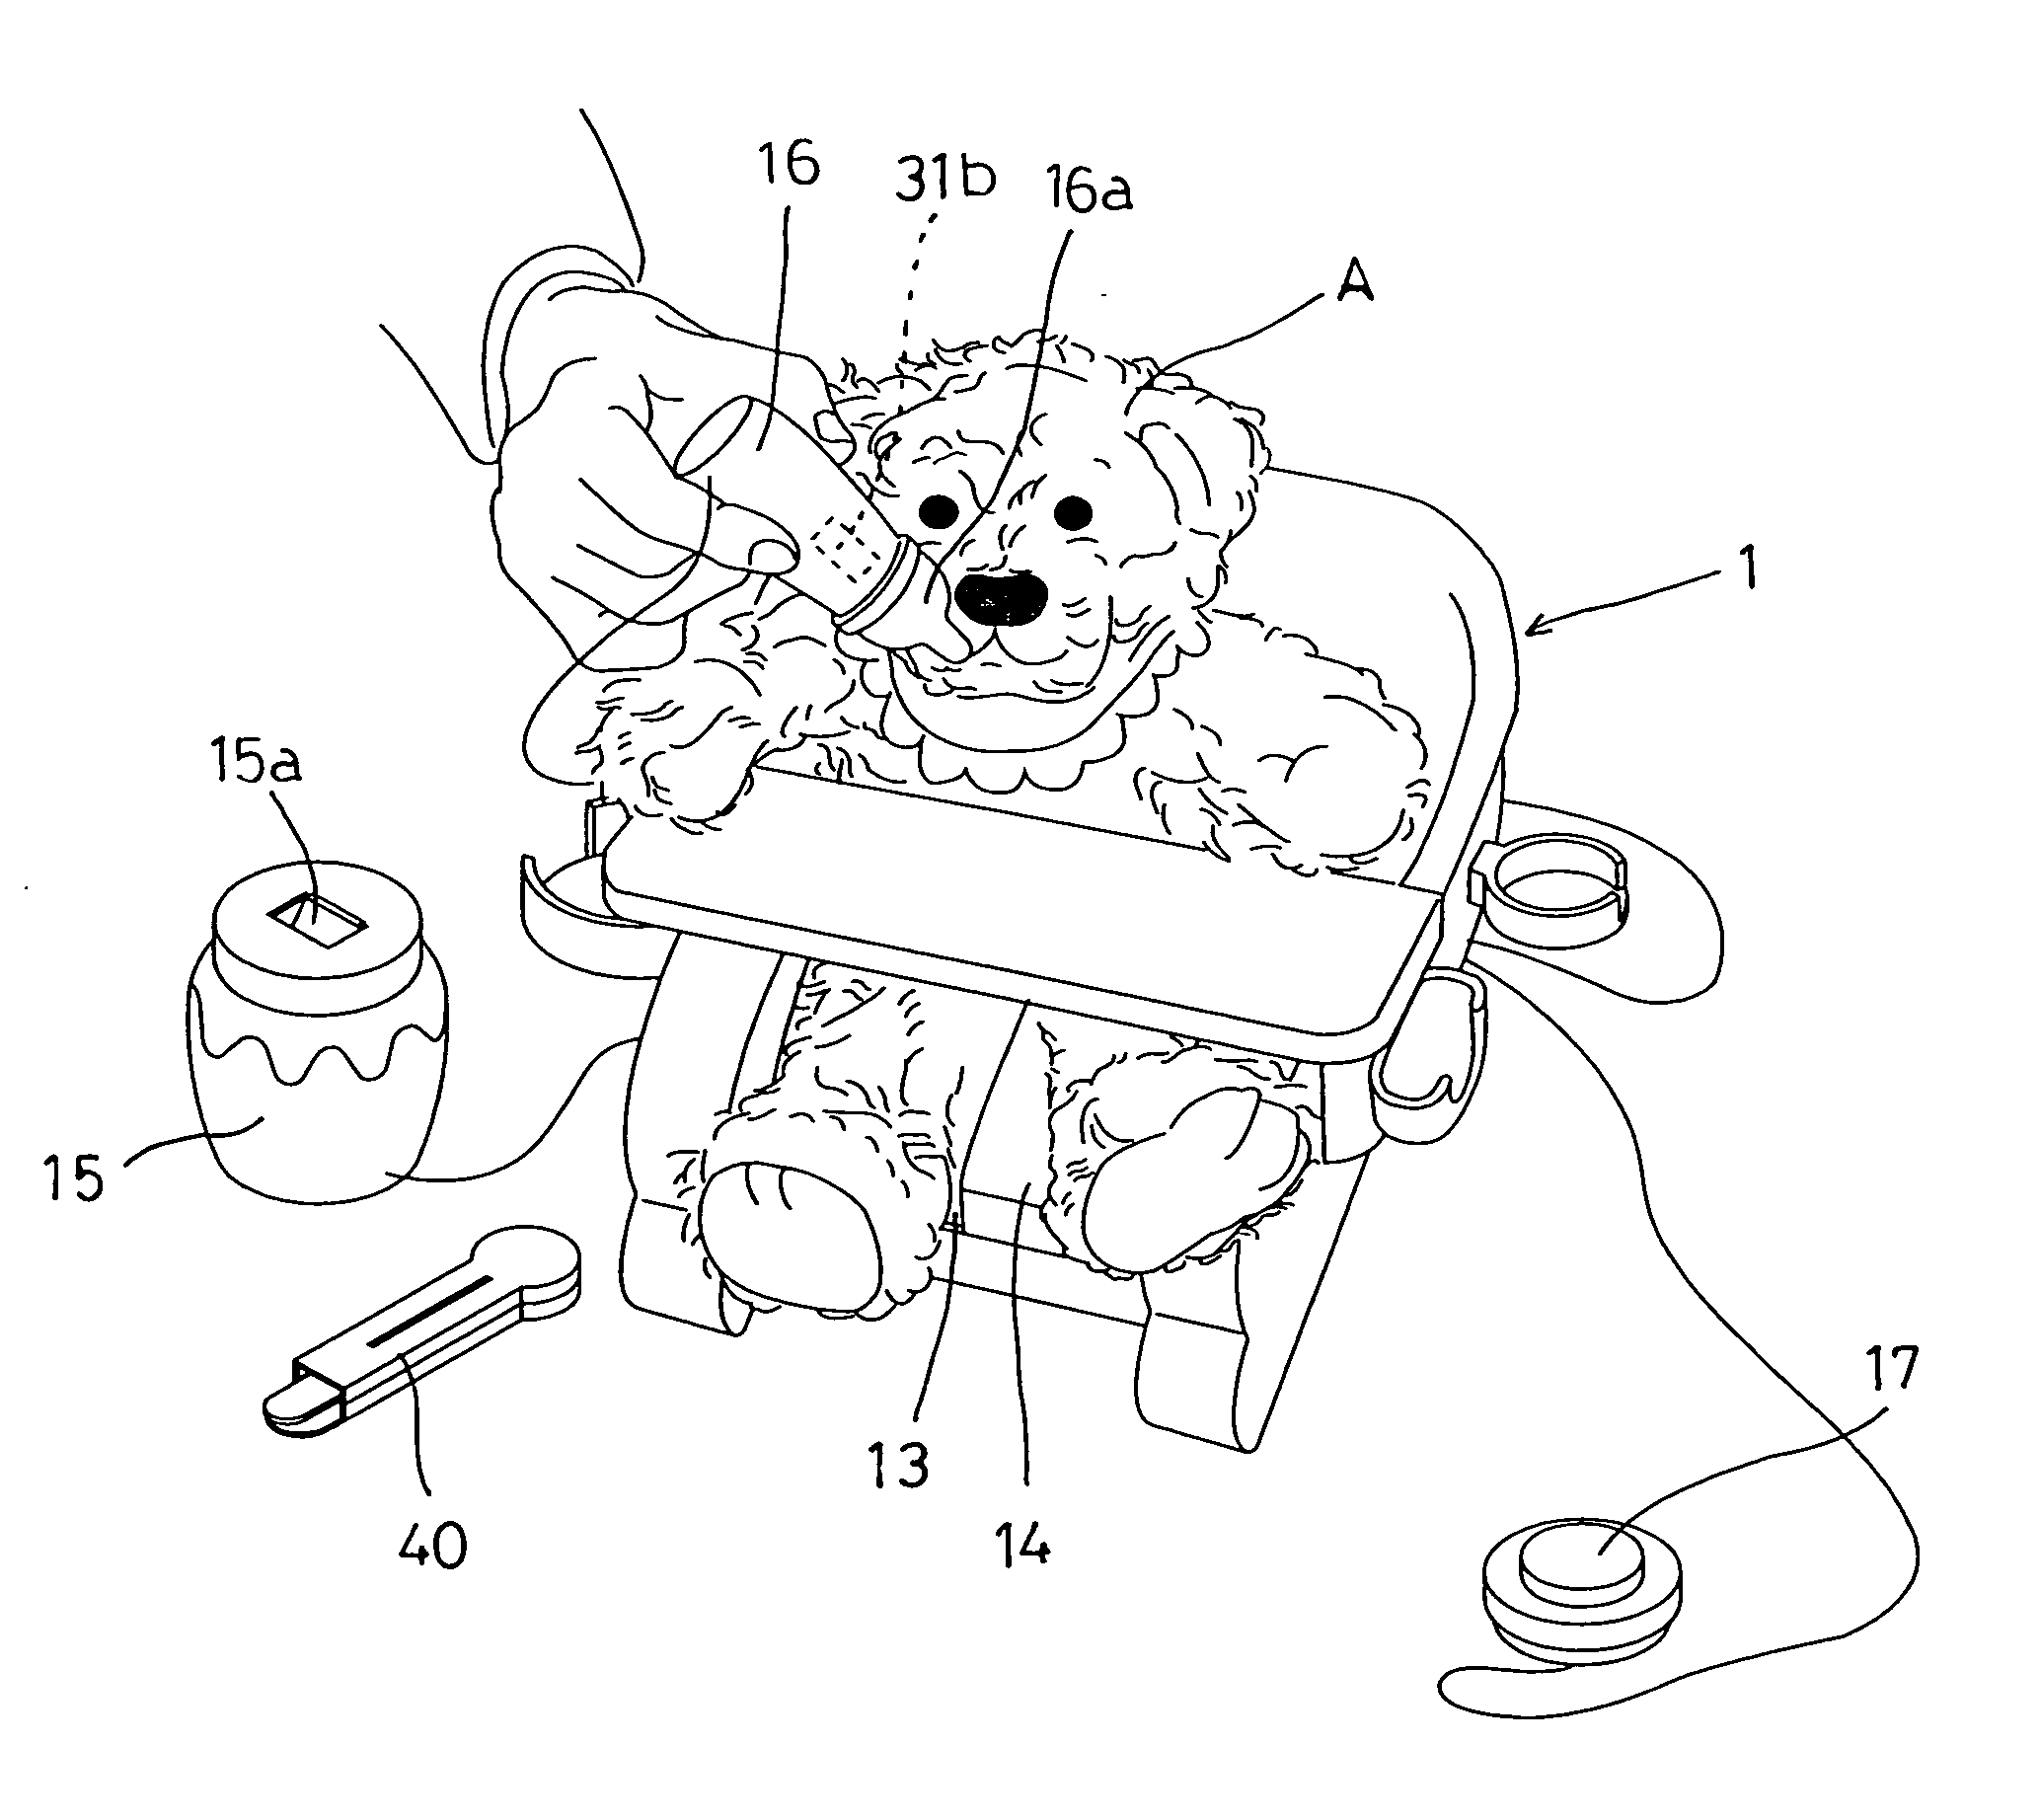 Toy actuation device